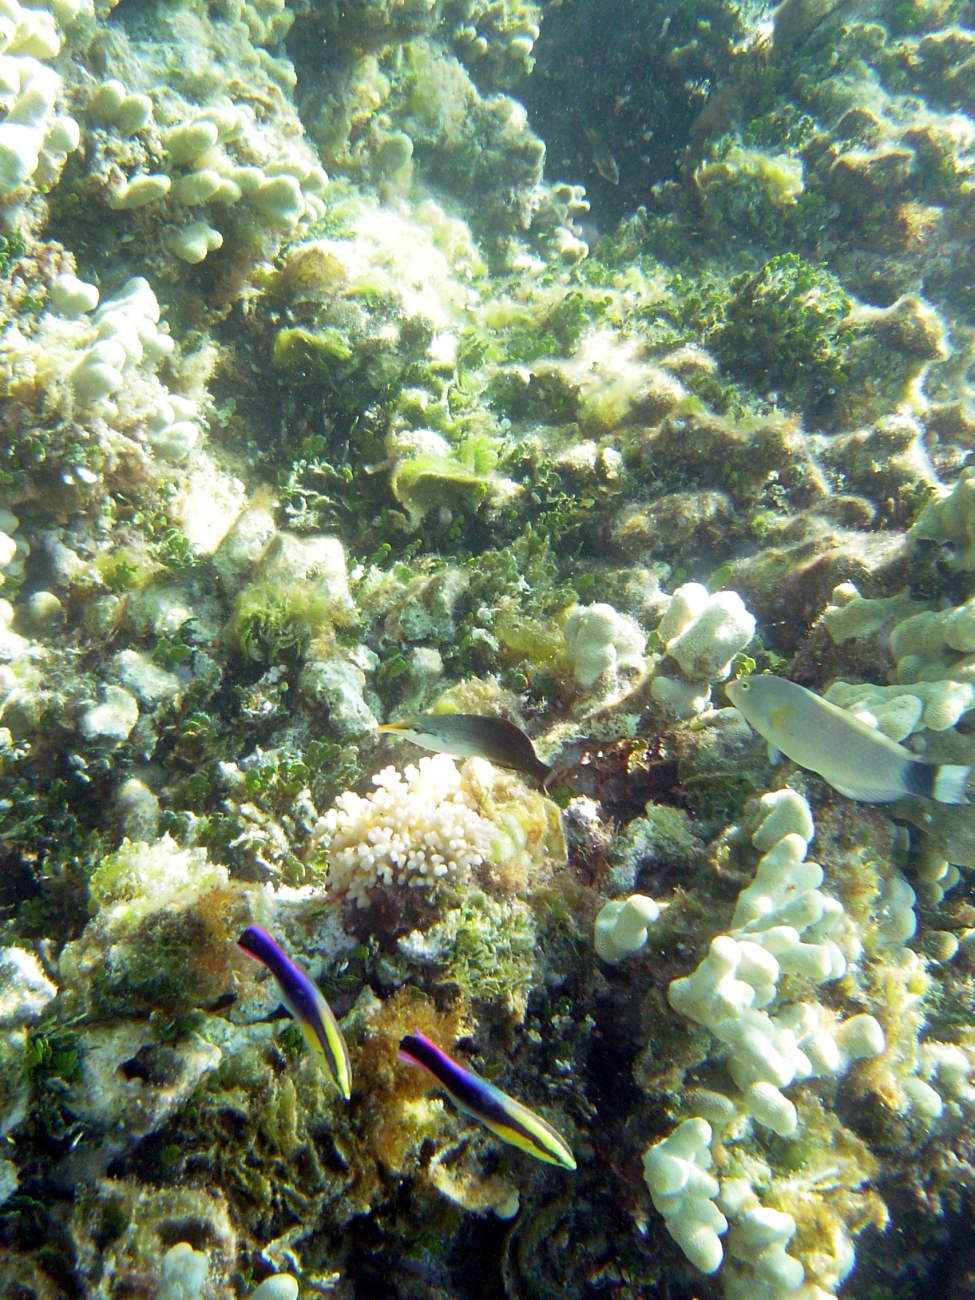 Cleaner wrasses (Labroides phthirophagus) in bottom center ofreef scene